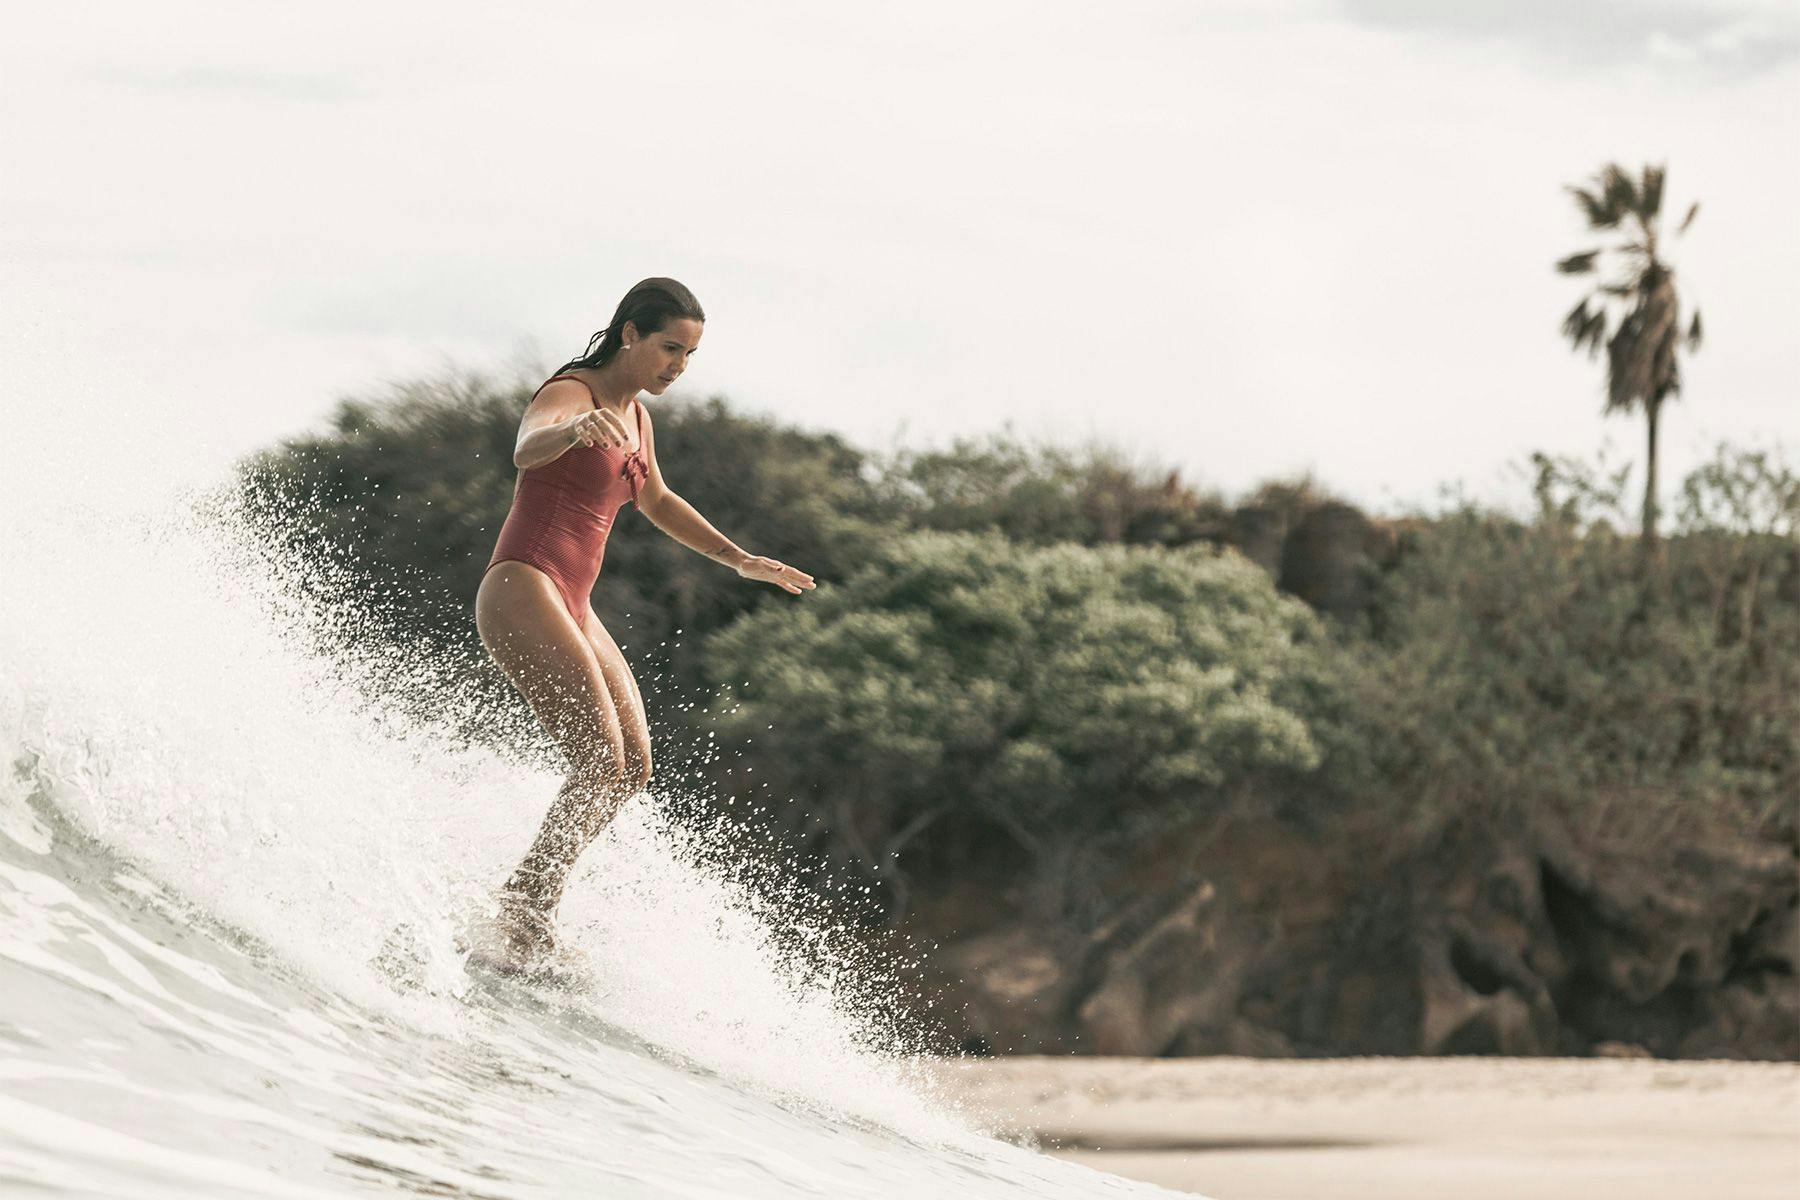 female longboard surfer noseriding with a tropical jungle in the background, by ana catarina